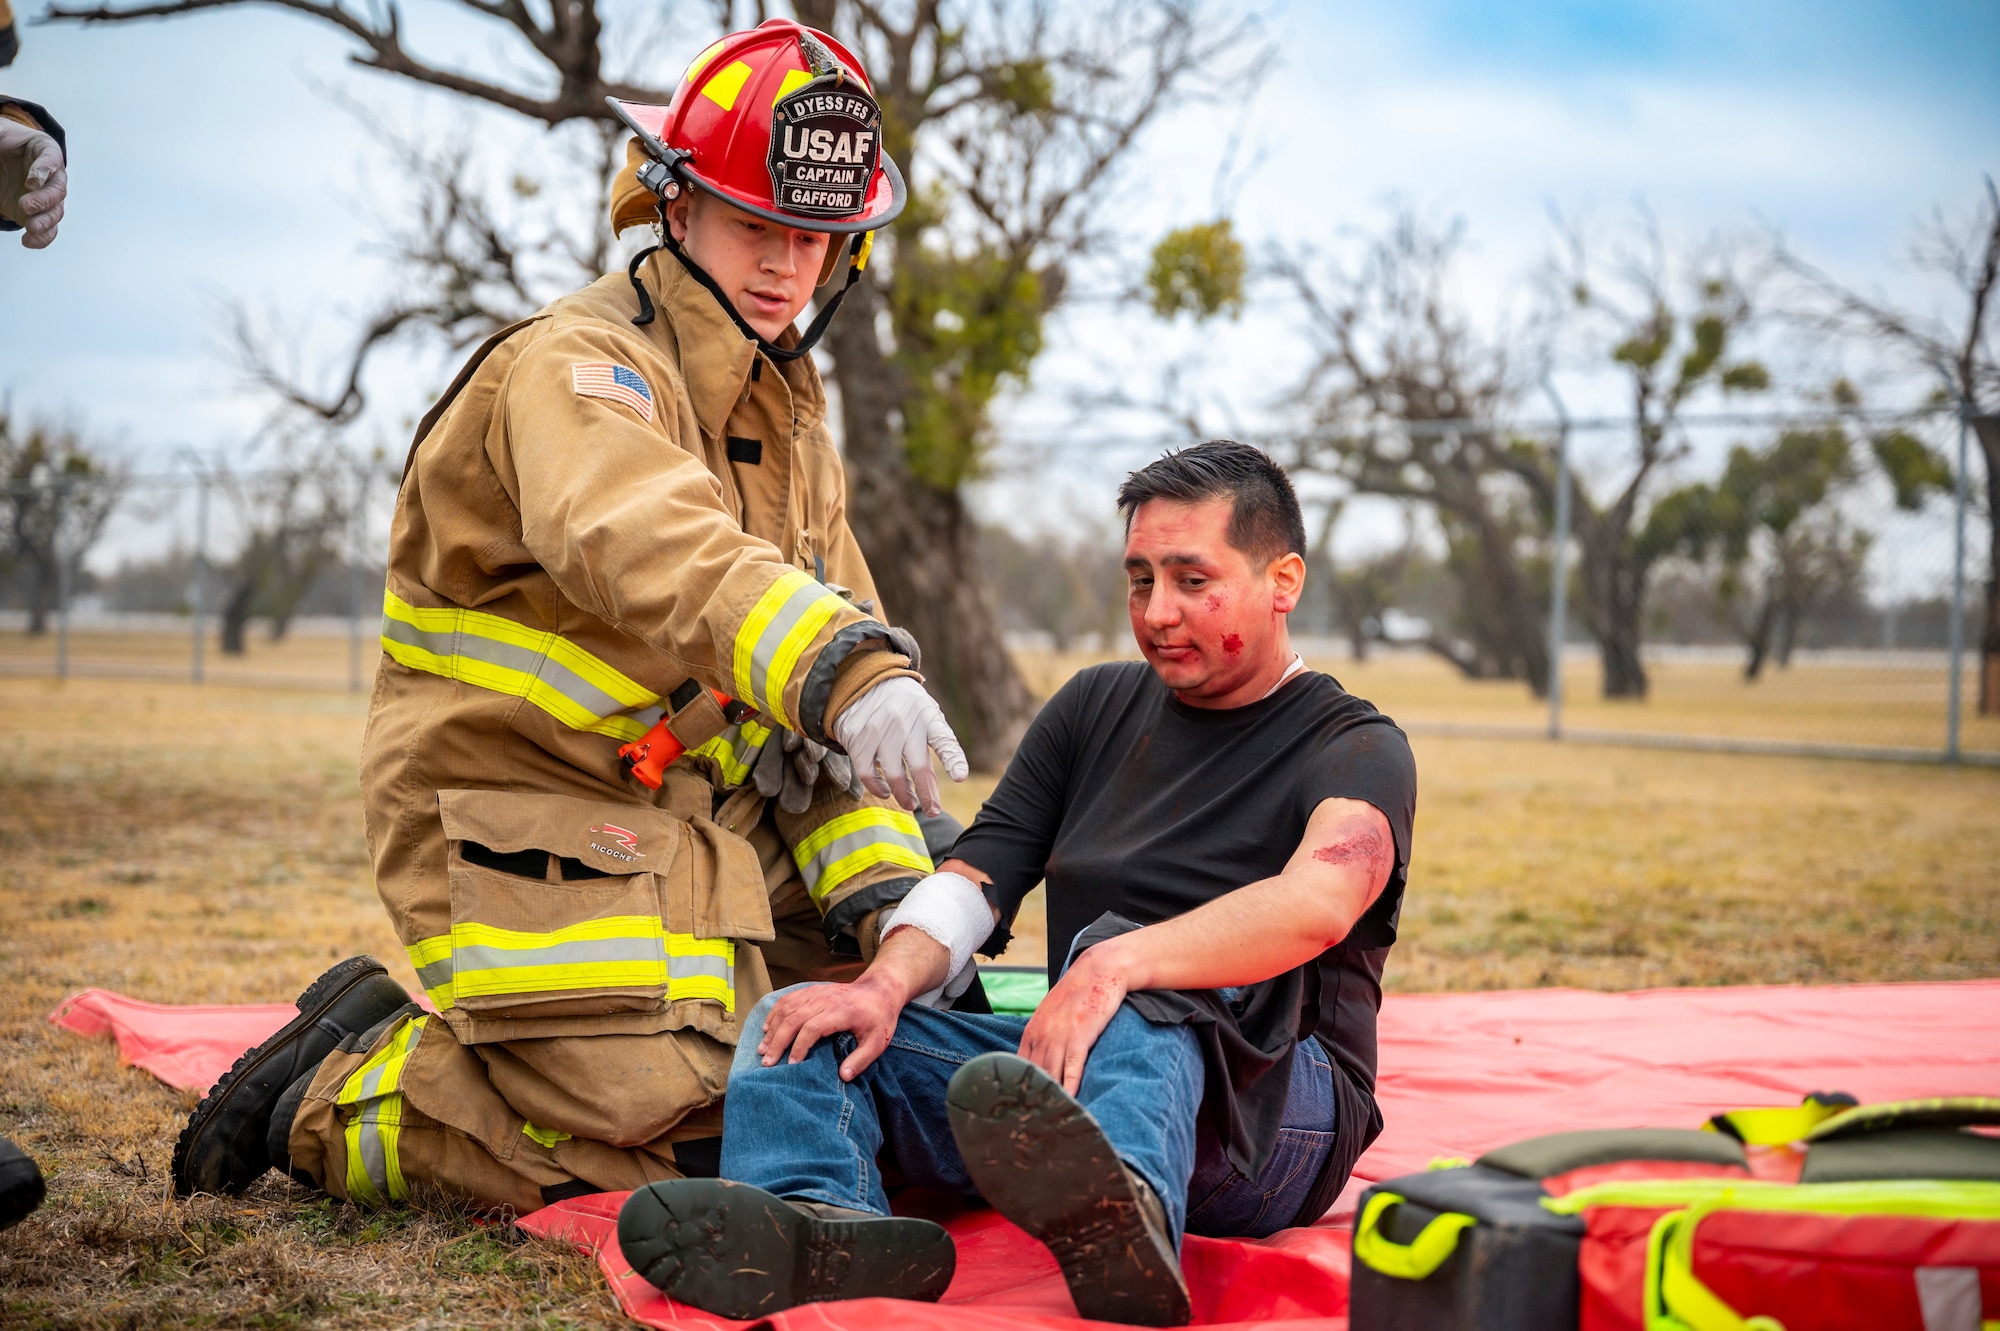 A 7th Civil Engineer Squadron firefighter assists a simulated medical patient during the Ready Eagle II exercise capstone at Dyess Air Force Base, Texas, Jan. 25, 2024. Ready Eagle II is an Air Force-wide directed training held to increase medical readiness for home station response to any medical emergencies or hazardous incidents. (U.S. Air Force photo by Senior Airman Leon Redfern)